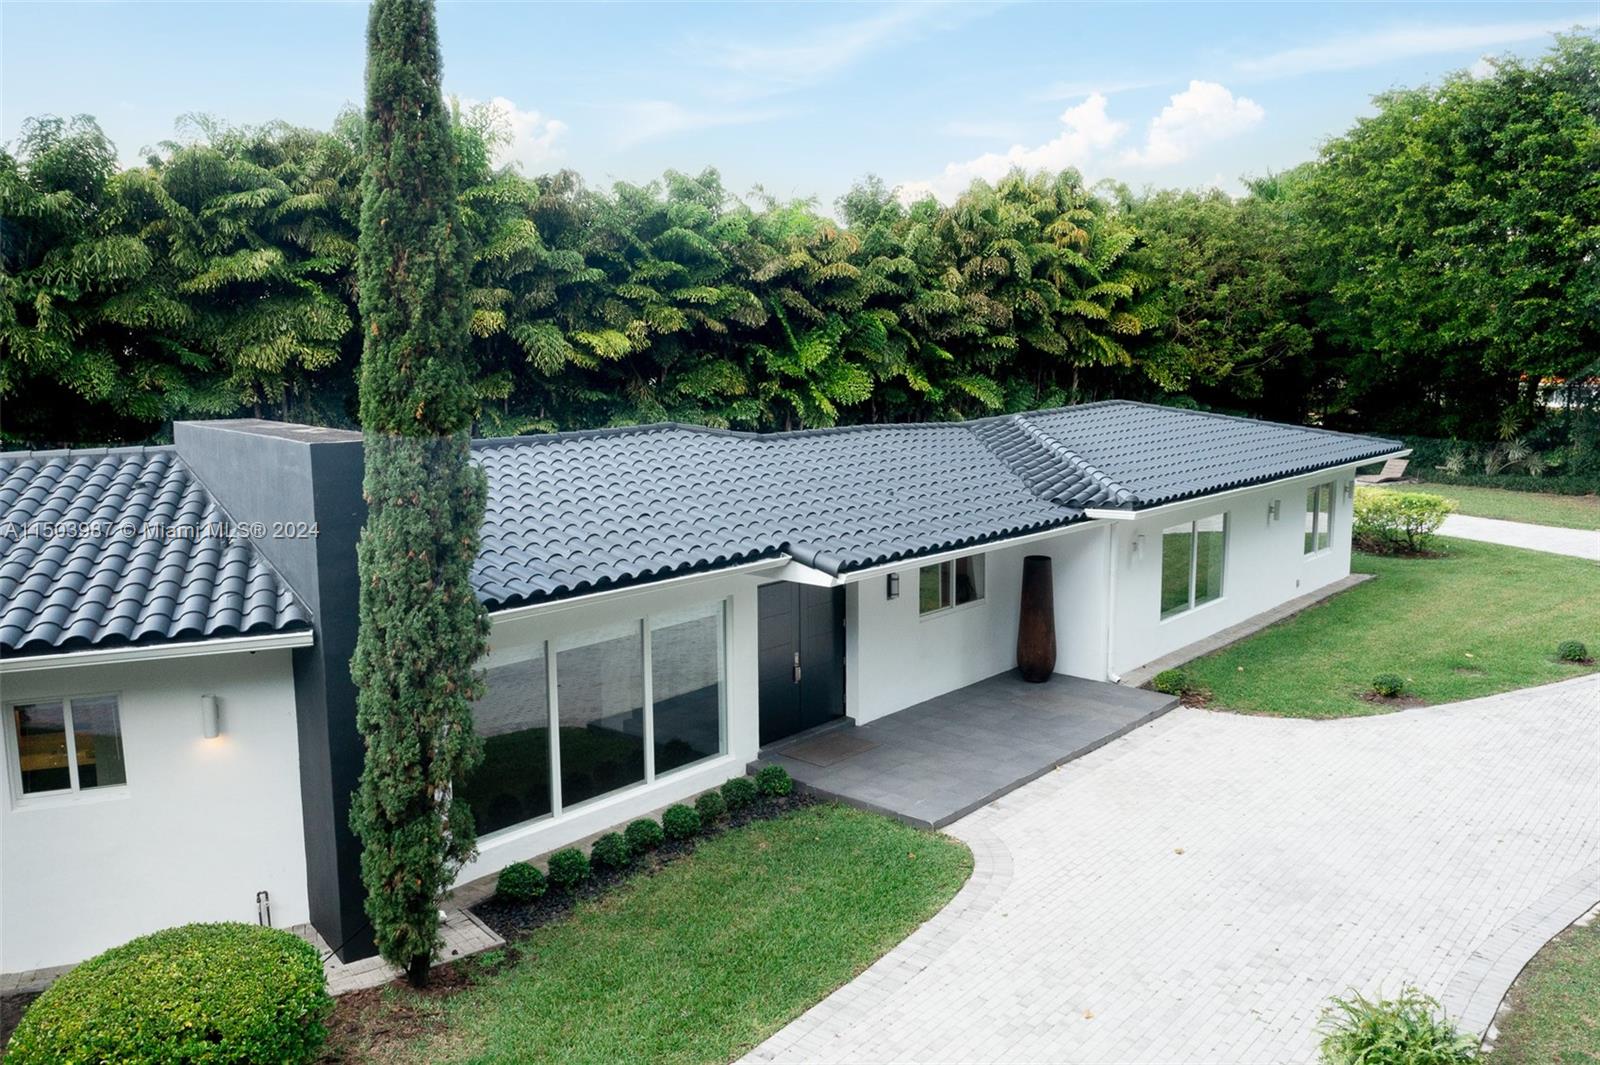 Meticulously remodeled 4,481 SF residence, sits on a 40,075 SF lot in the heart of Coral Gables. Features 4 bedrooms, 3.5-bathrooms, and the serenity of oak and banyan trees. The exceptional split floor plan showcases thoughtfully located and spacious bedrooms, two primary suites, and 3.5 bathrooms. A gourmet eat-in kitchen offers ample counter space and an oversized walk-in pantry. The beautiful backyard features a pool, covered dining and BBQ space, and lush landscaping providing optimal privacy. Additional features include impact windows and doors and stunning porcelain floors throughout. Close to the best schools, restaurants, parks, and shopping. Also available for rent.